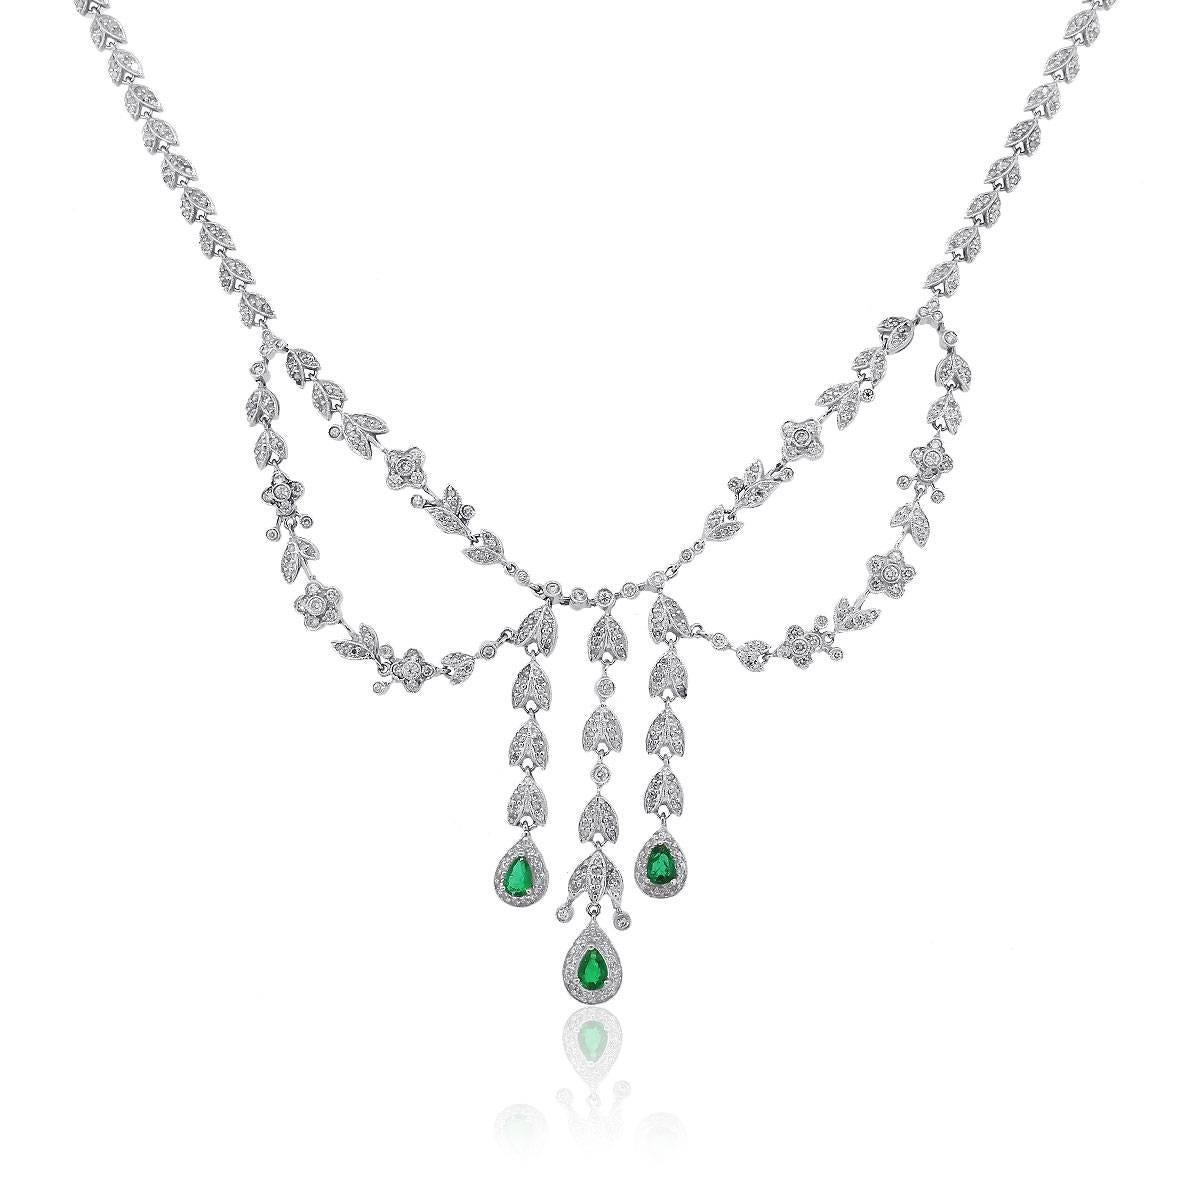 Style: Pear Shape Emerald Dangling Necklace
Metal: 14k White Gold 
Diamond Details: Approximately 1.50ctw Round cut diamond. Diamonds are H/I in color and SI in clarity
Gemstone Details: Approximately 1.2ctw of Pear shape Emeralds.
Total Weight: 30g